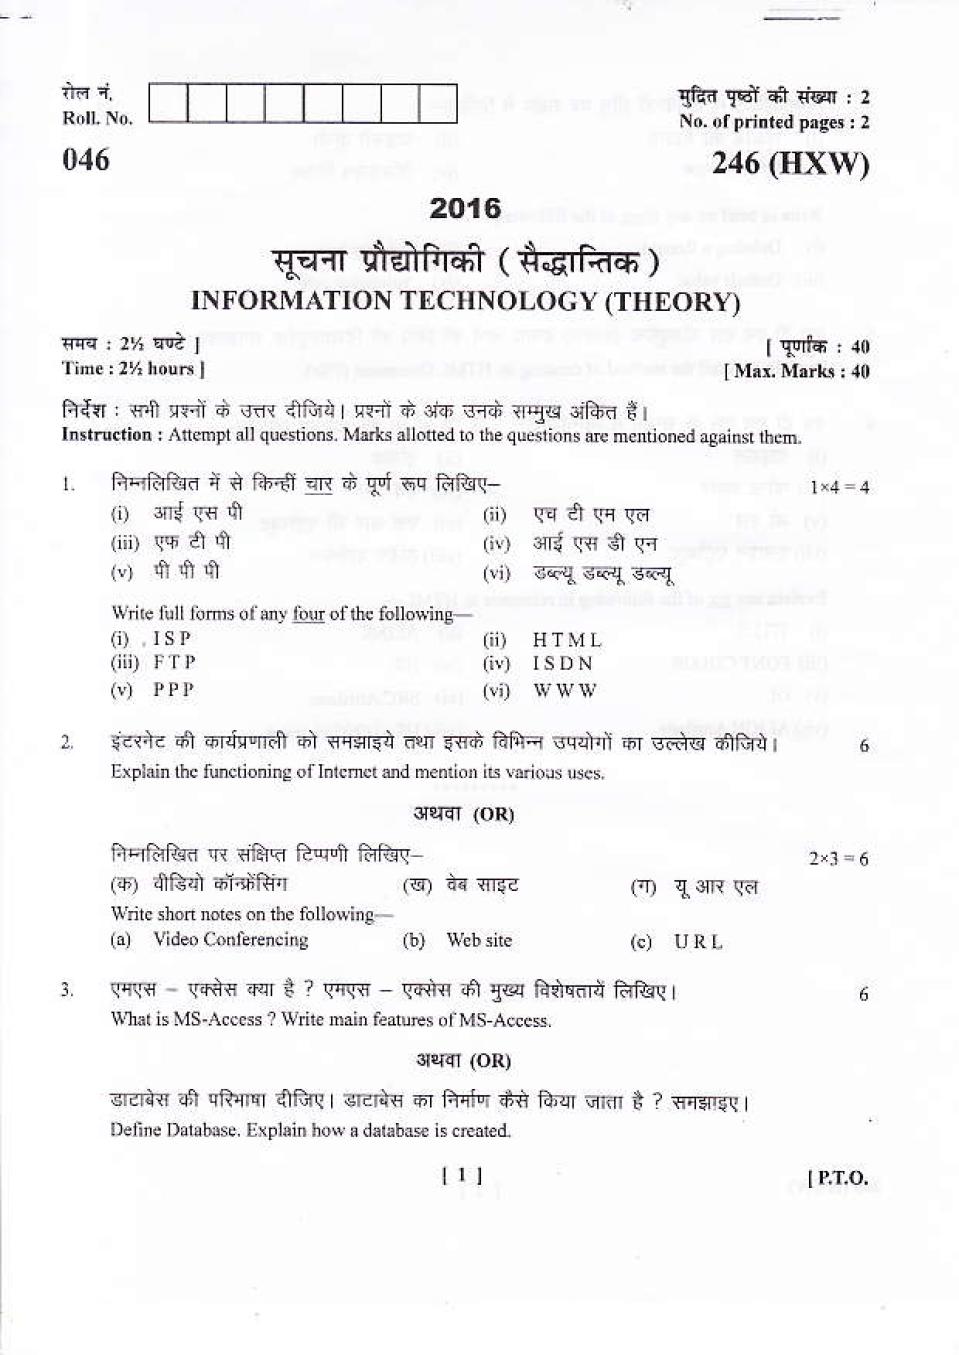 Uttarakhand Board Class 10 Question Paper 2016 for Information Technology - Page 1